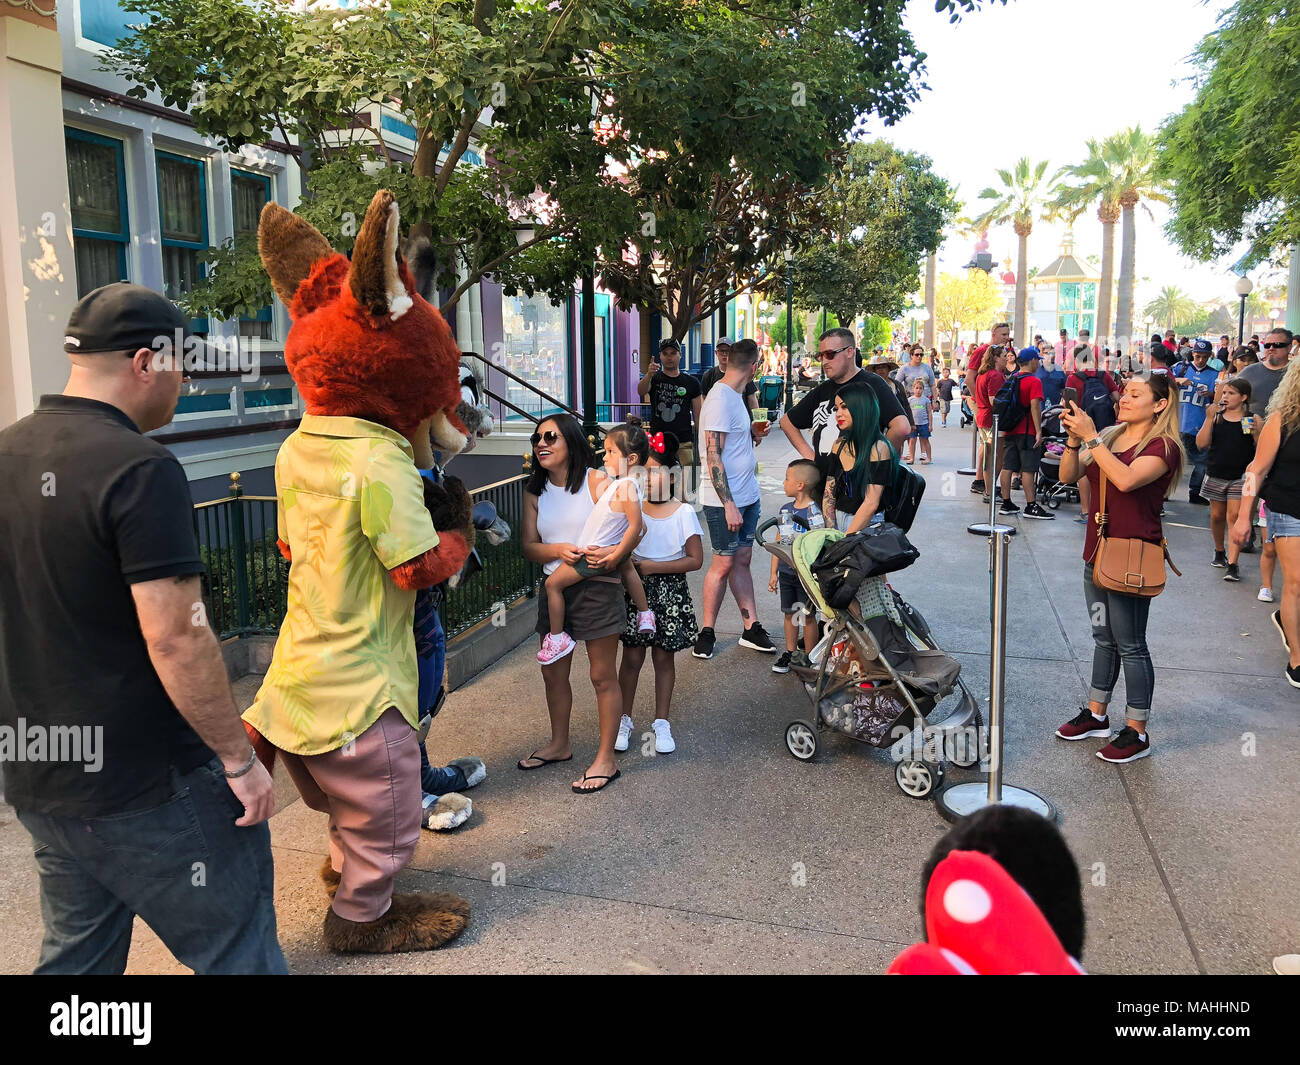 ANAHEIM, CA - OCTOBER 16, 2017: Zootopia's fox character, Nick Wilde, signs autographs and meets with people at California Adventure in Disneyland Cal Stock Photo